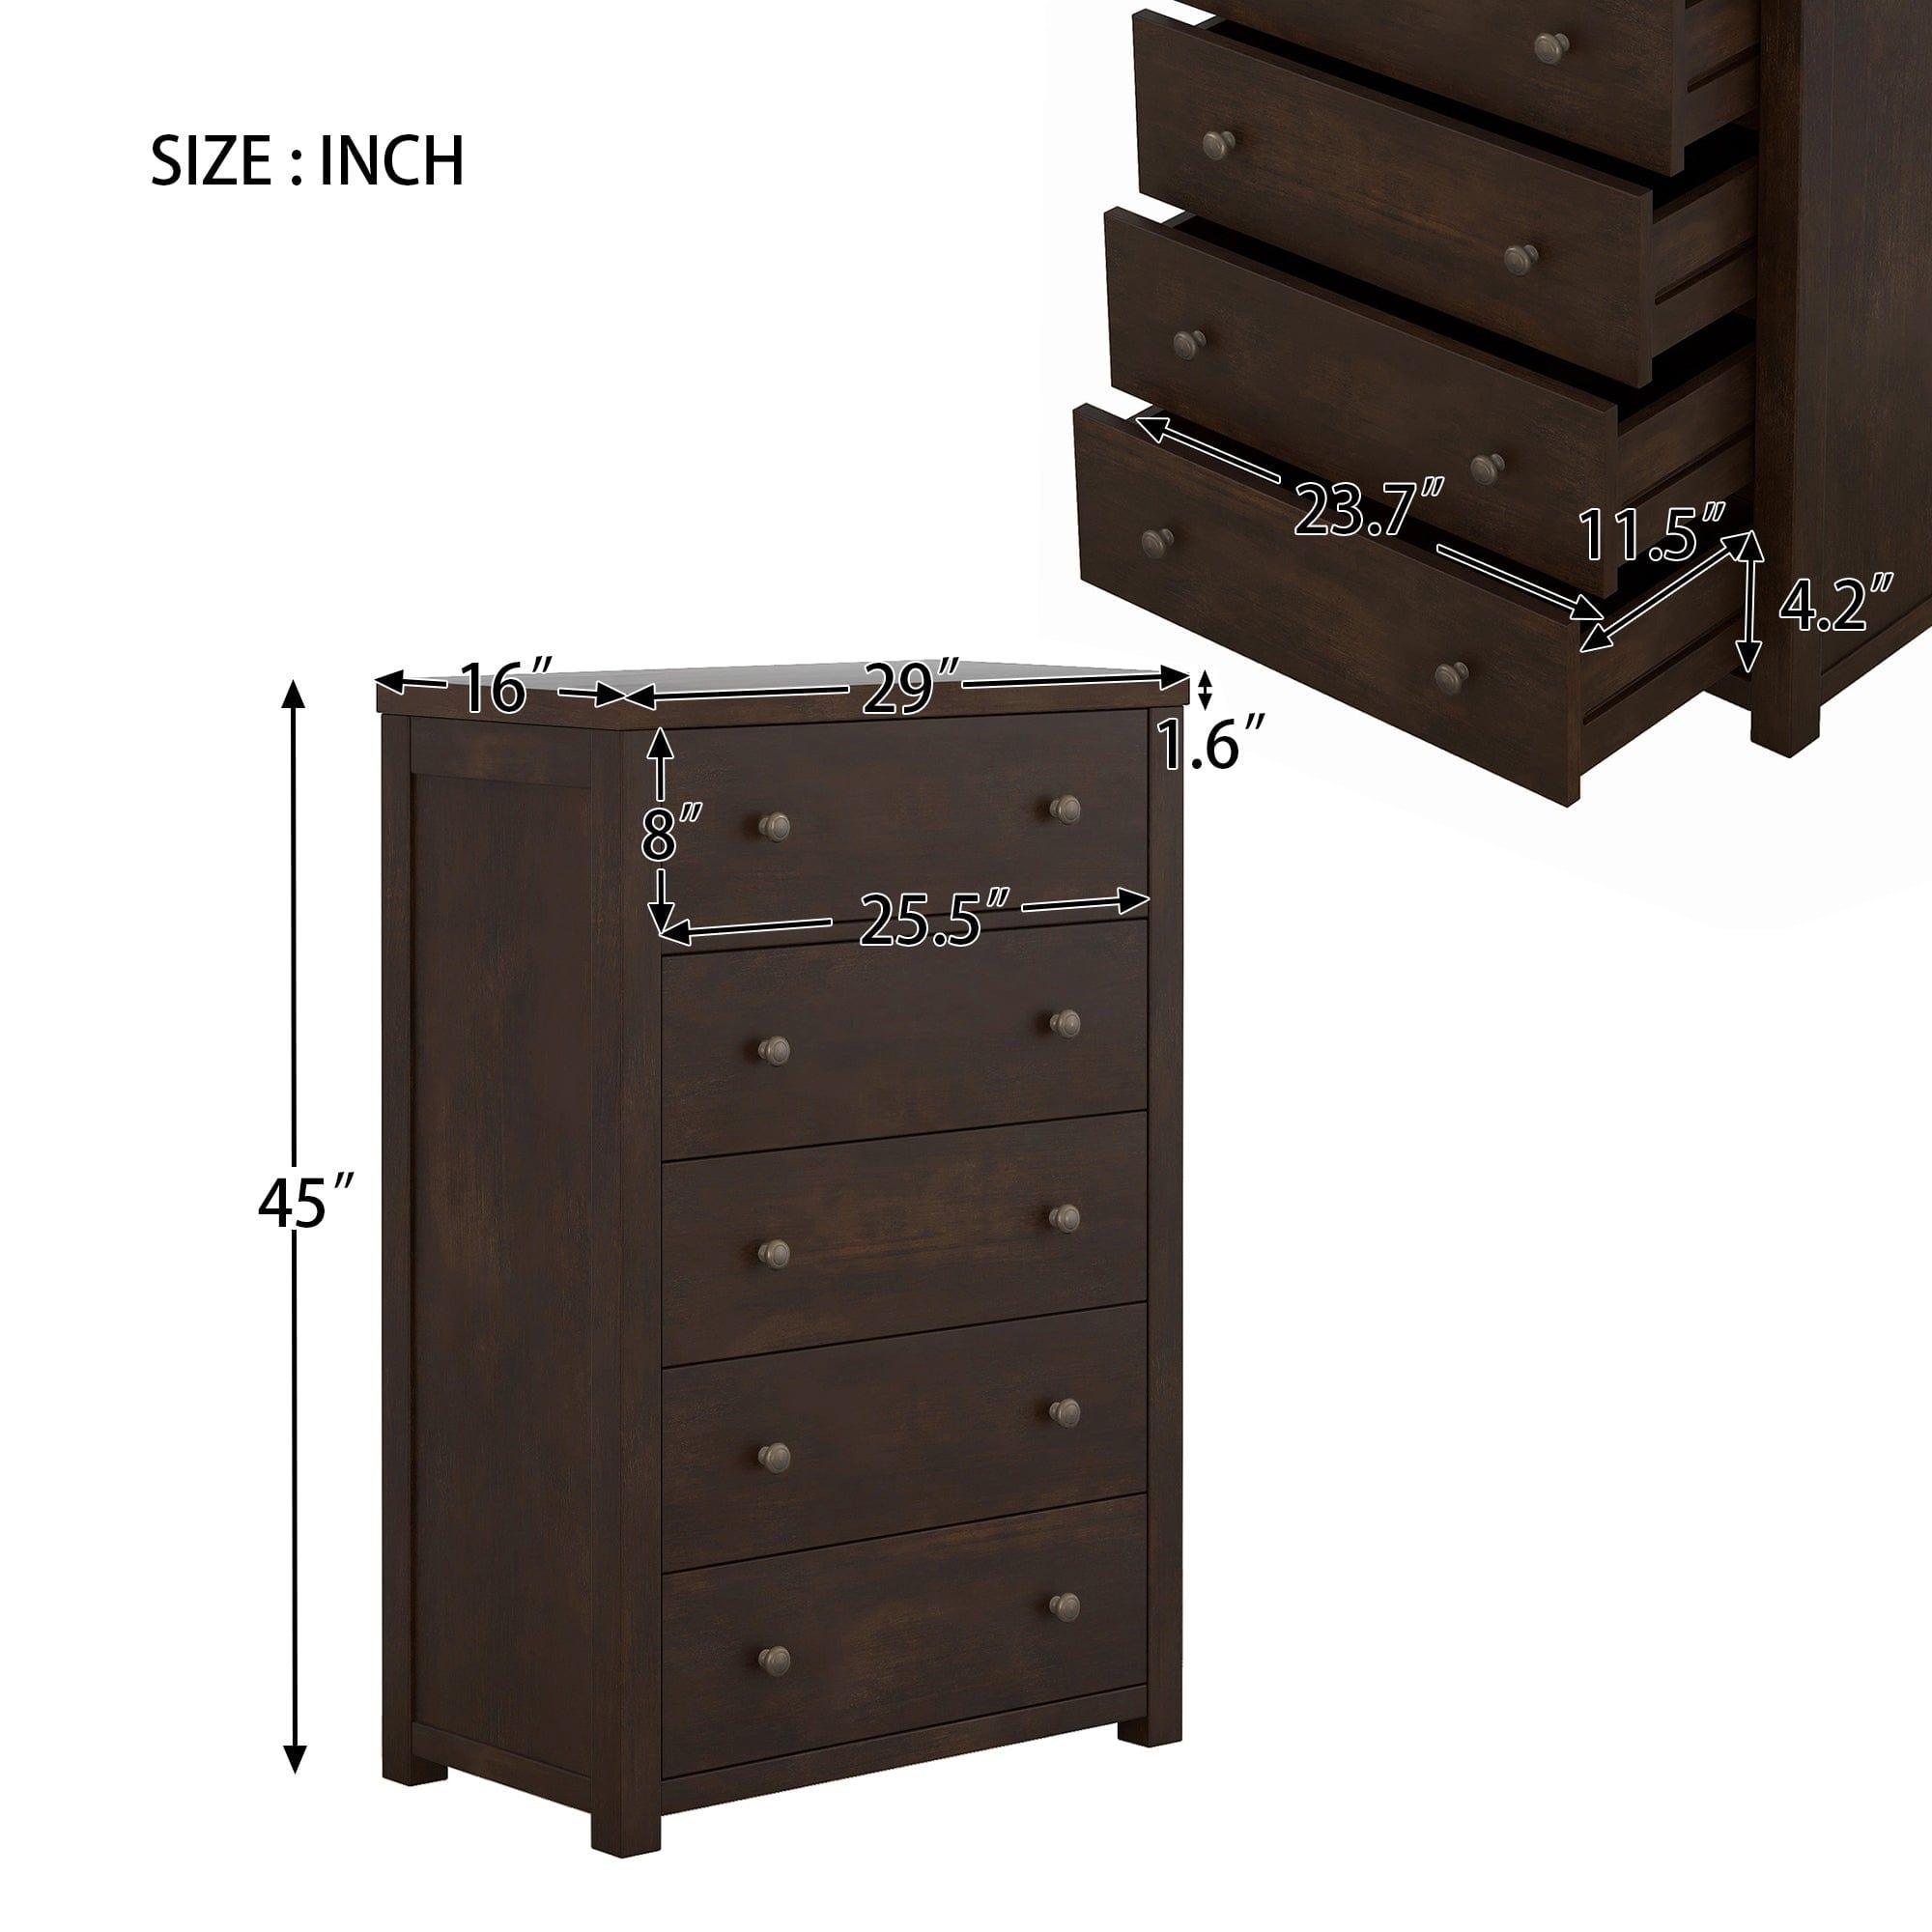 Shop Classic Rich Brown 6 Pieces King Bedroom Set ( King Bed + Nightstand*2+ Dresser + Chest + Mirror) Mademoiselle Home Decor